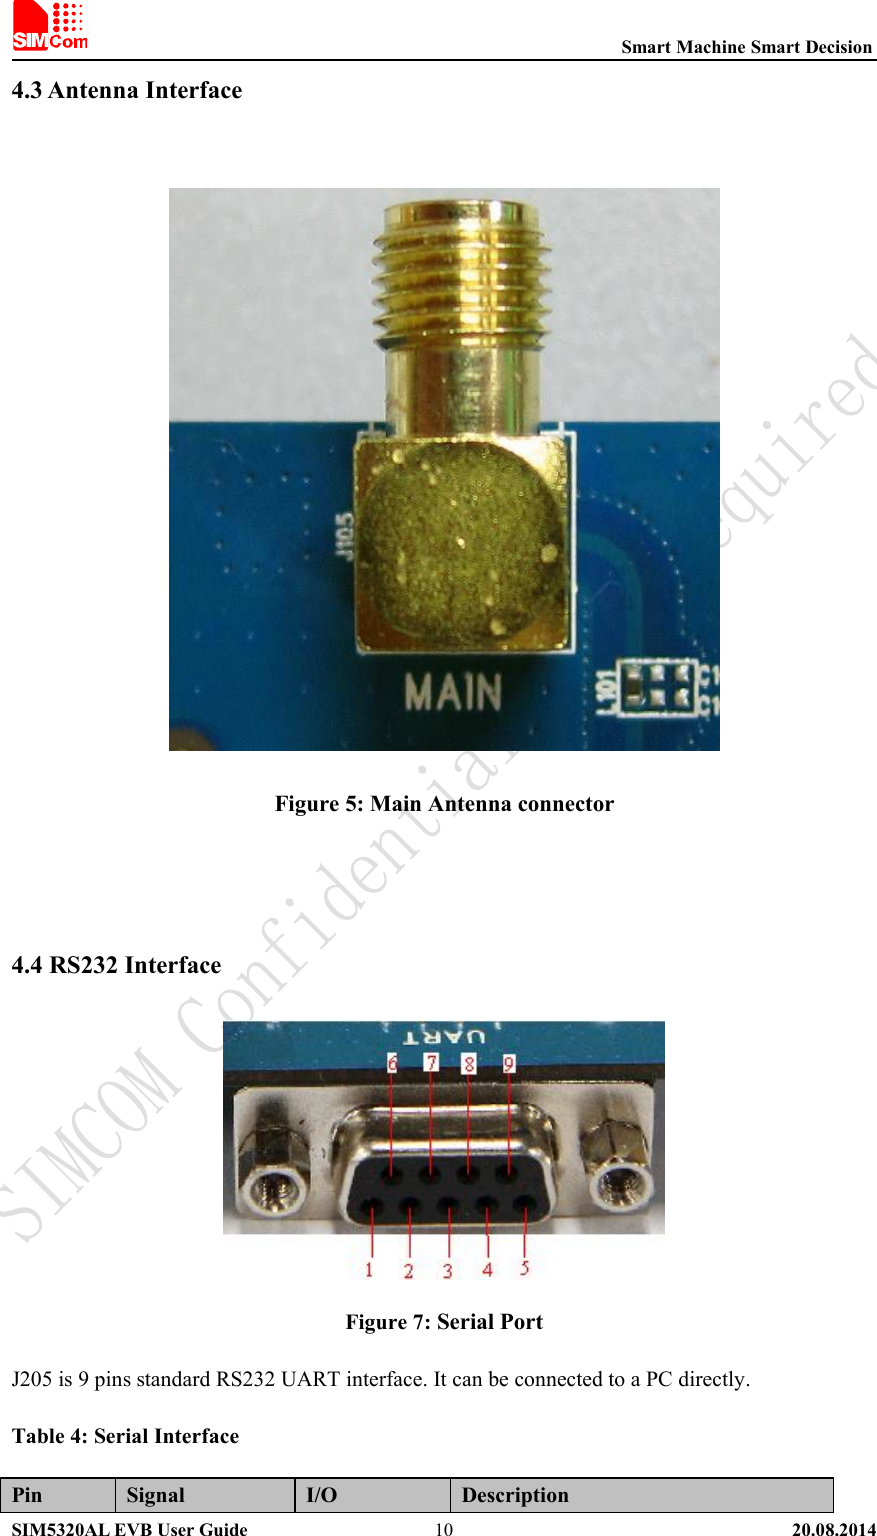 Smart Machine Smart DecisionSIM5320AL EVB User Guide 20.08.2014104.3 Antenna InterfaceFigure 5: Main Antenna connector4.4 RS232 InterfaceFigure 7: Serial PortJ205 is 9 pins standard RS232 UART interface. It can be connected to a PC directly.Table 4: Serial InterfacePin Signal I/O Description